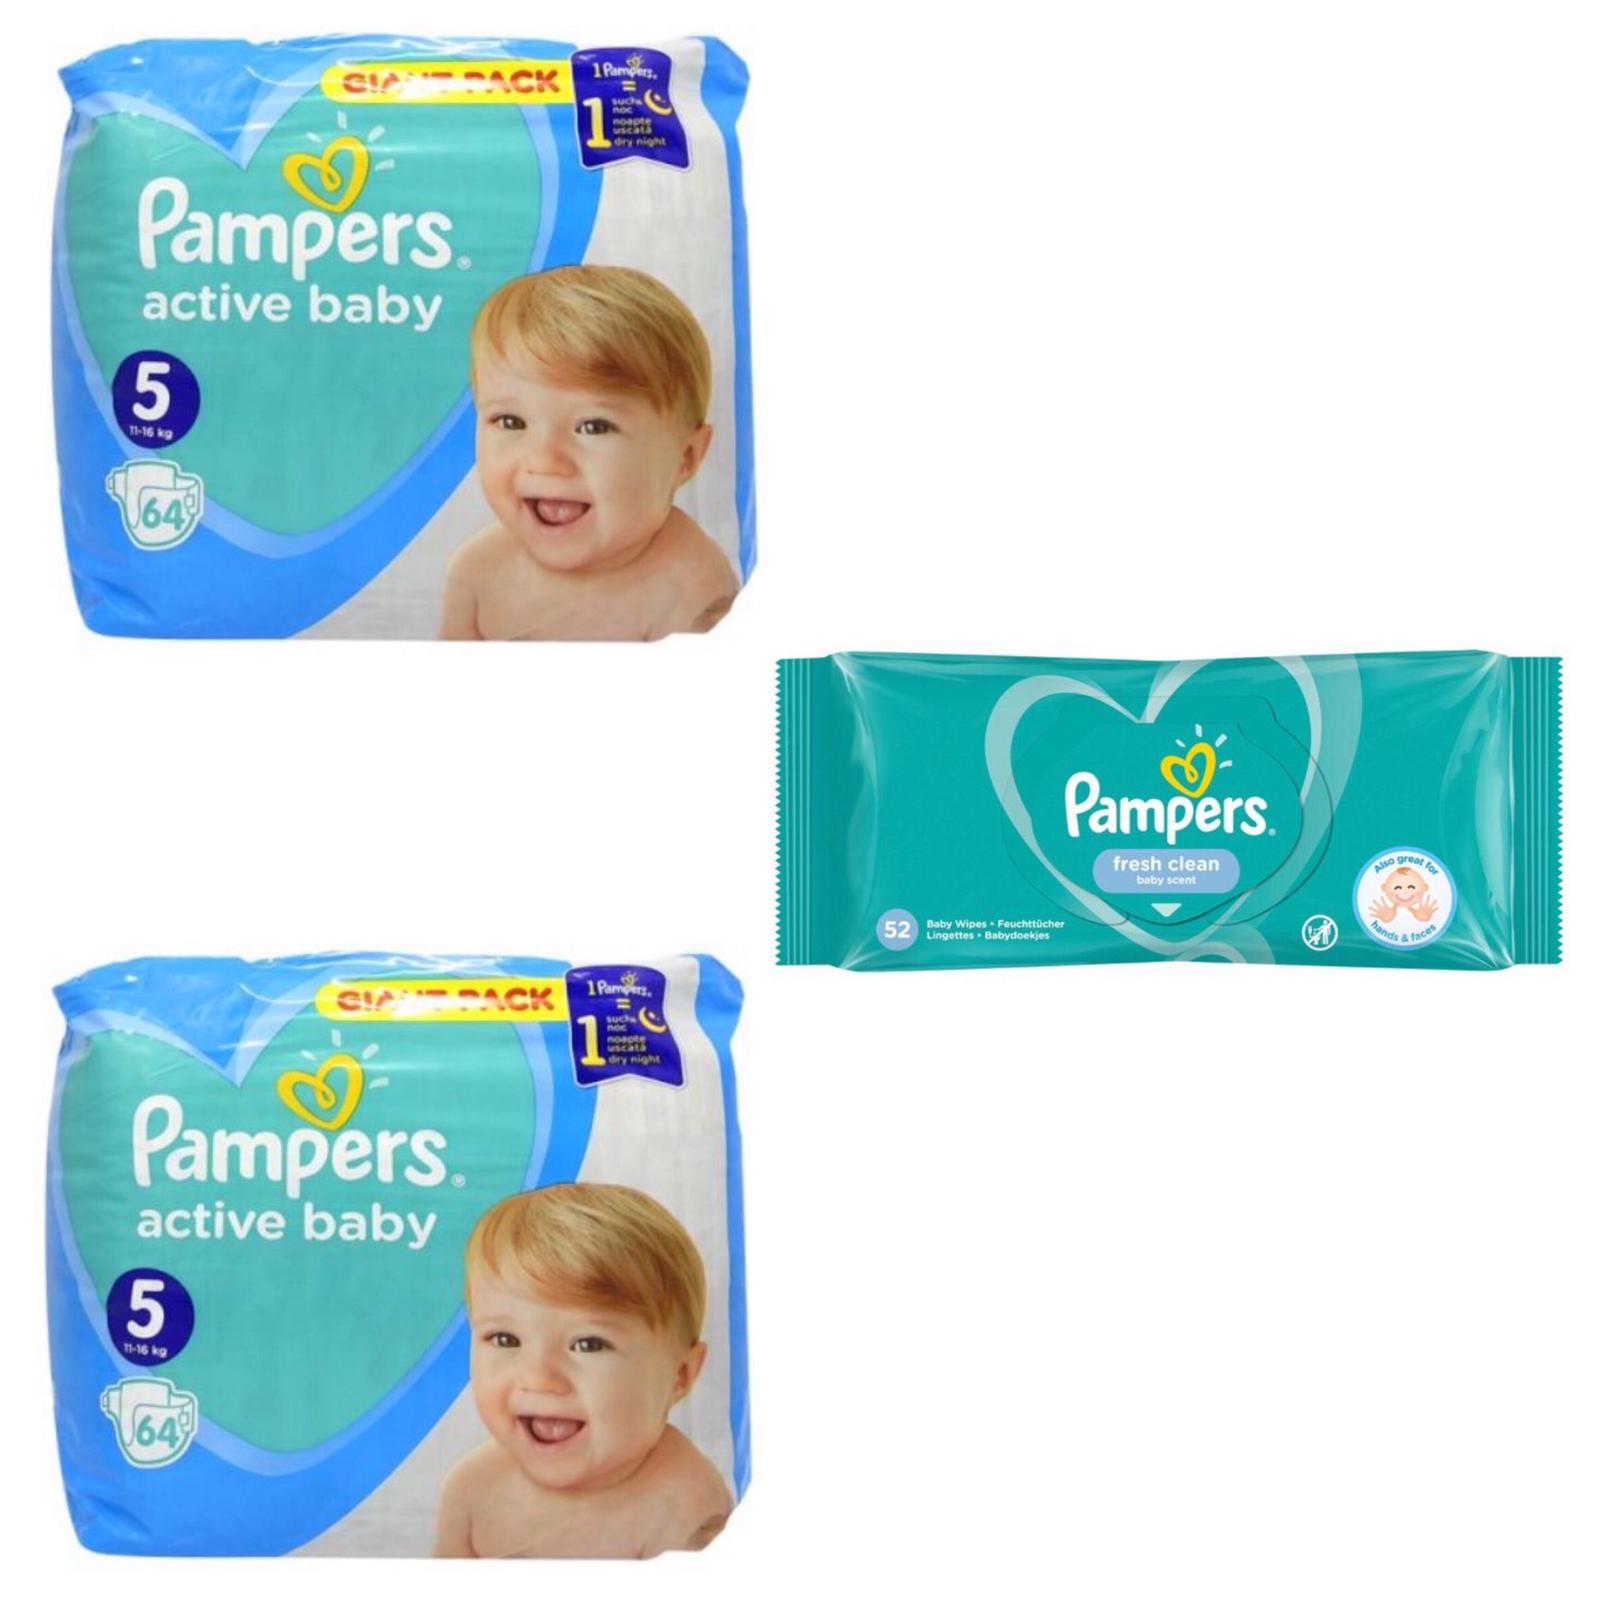 fracture consumption Ruckus Pachet 2 x Scutece Pampers Active Baby nr. 5, 11-16 kg, 64 buc + Servetele  umede Pampers Fresh Clean, 1 x 52buc - eMAG.ro